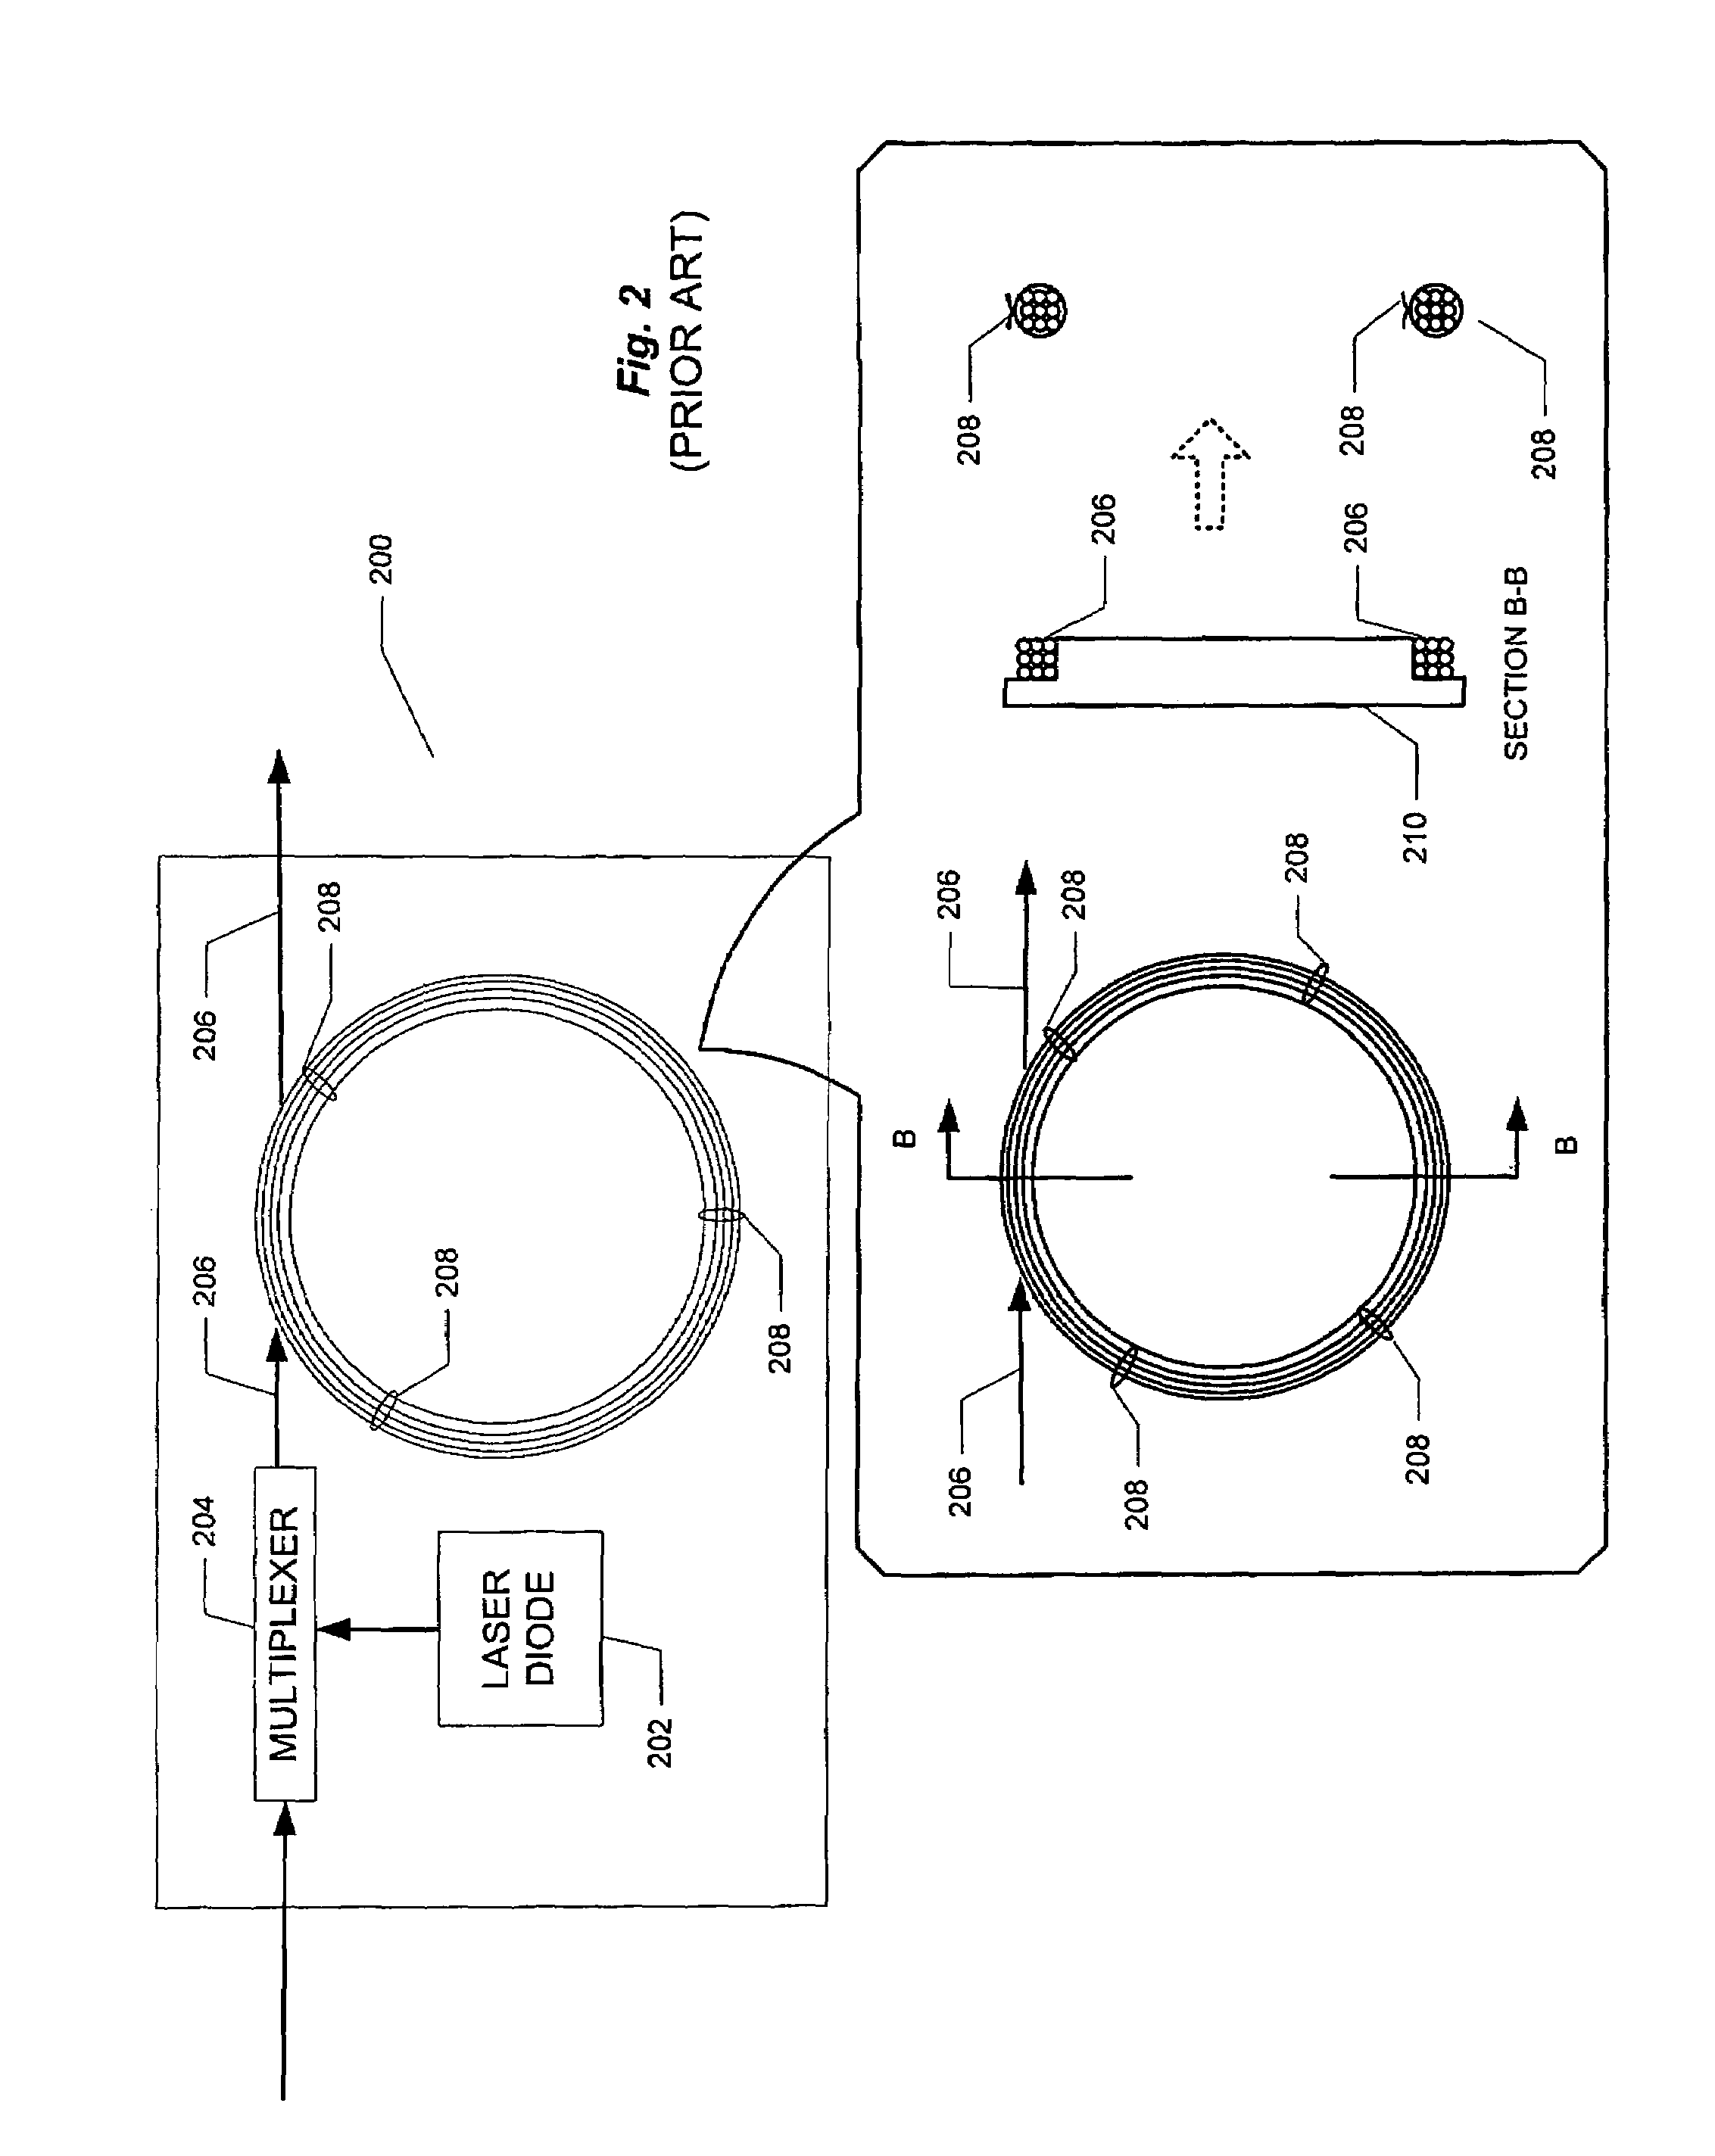 Temperature-controlled flexible optical circuit for use in an erbium-doped fiber amplifier and method for fabricating the flexible optical circuit